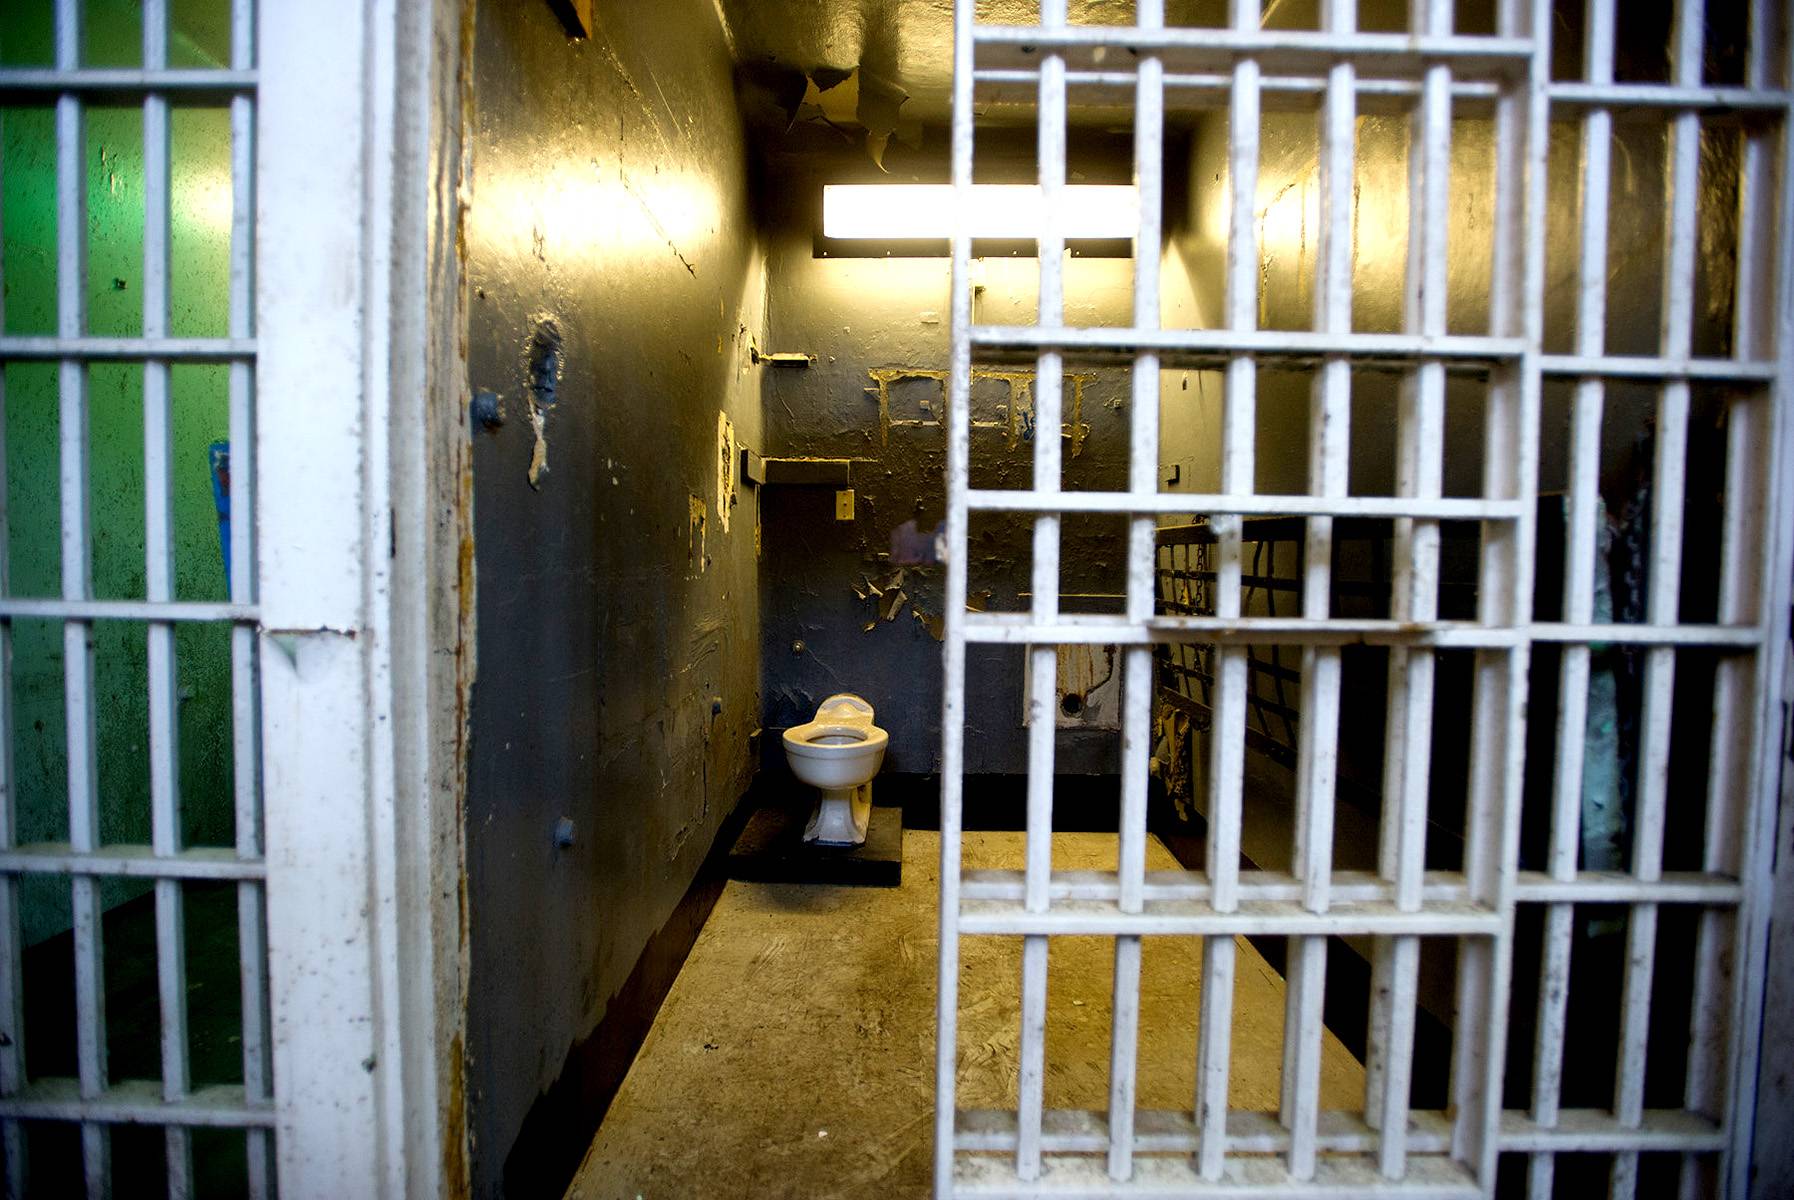 Black Inmate With Schizophrenia Dies of Thirst After 35 Days in Solitary